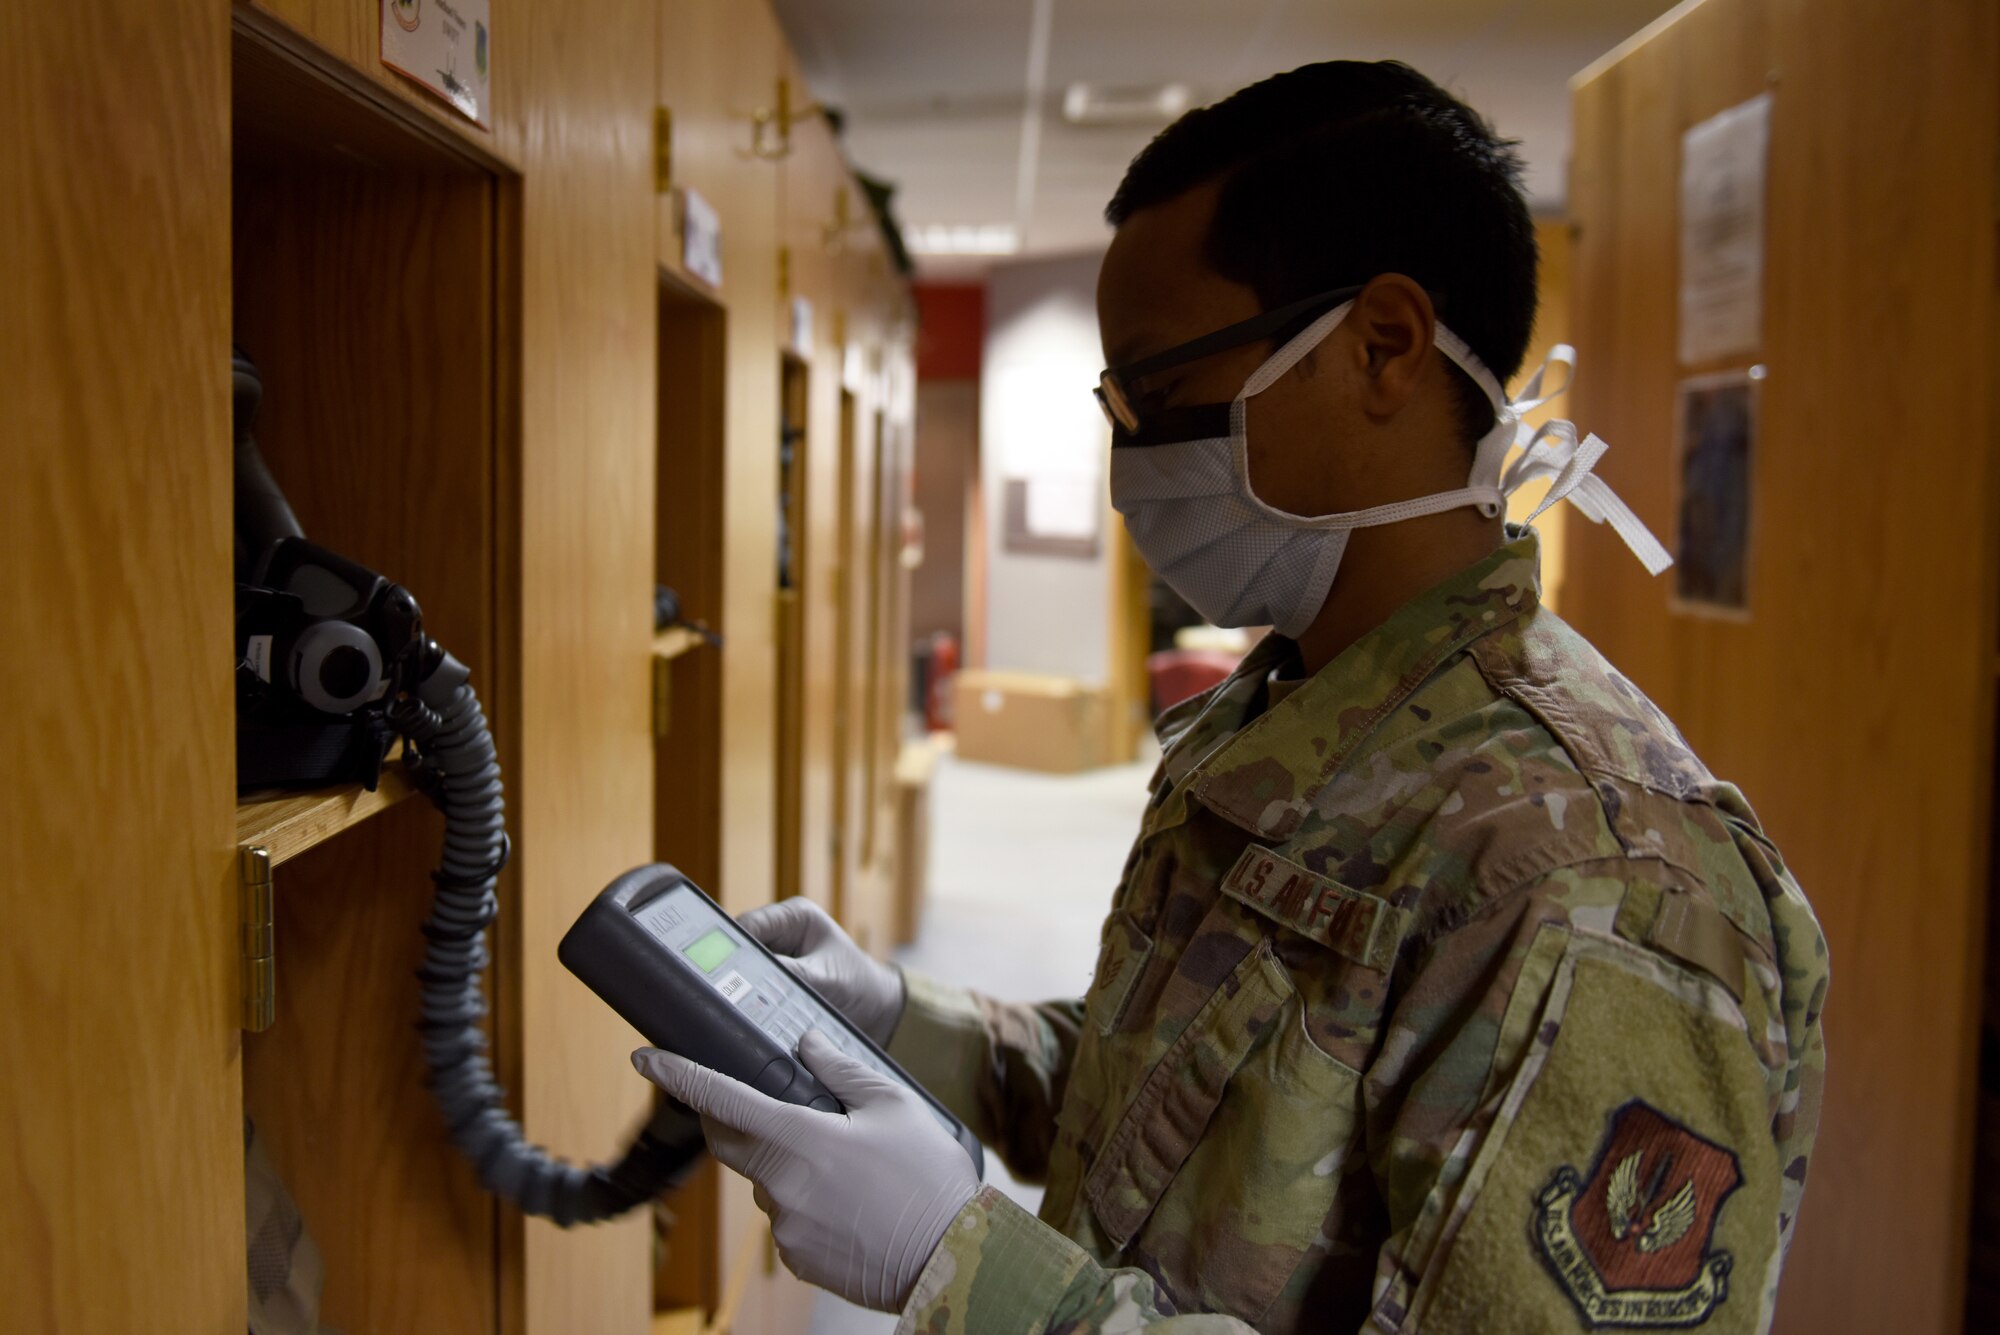 An Aircrew Flight Equipment Airman assigned to 494th Fighter Squadron checks flight gear at Royal Air Force Lakenheath, England, April 22, 2020. AFE technicians wear personal protective equipment such as masks and gloves while supporting continued mission operations despite the COVID-19 pandemic. (U.S. Air Force photo by Airman 1st Class Rhonda Smith)